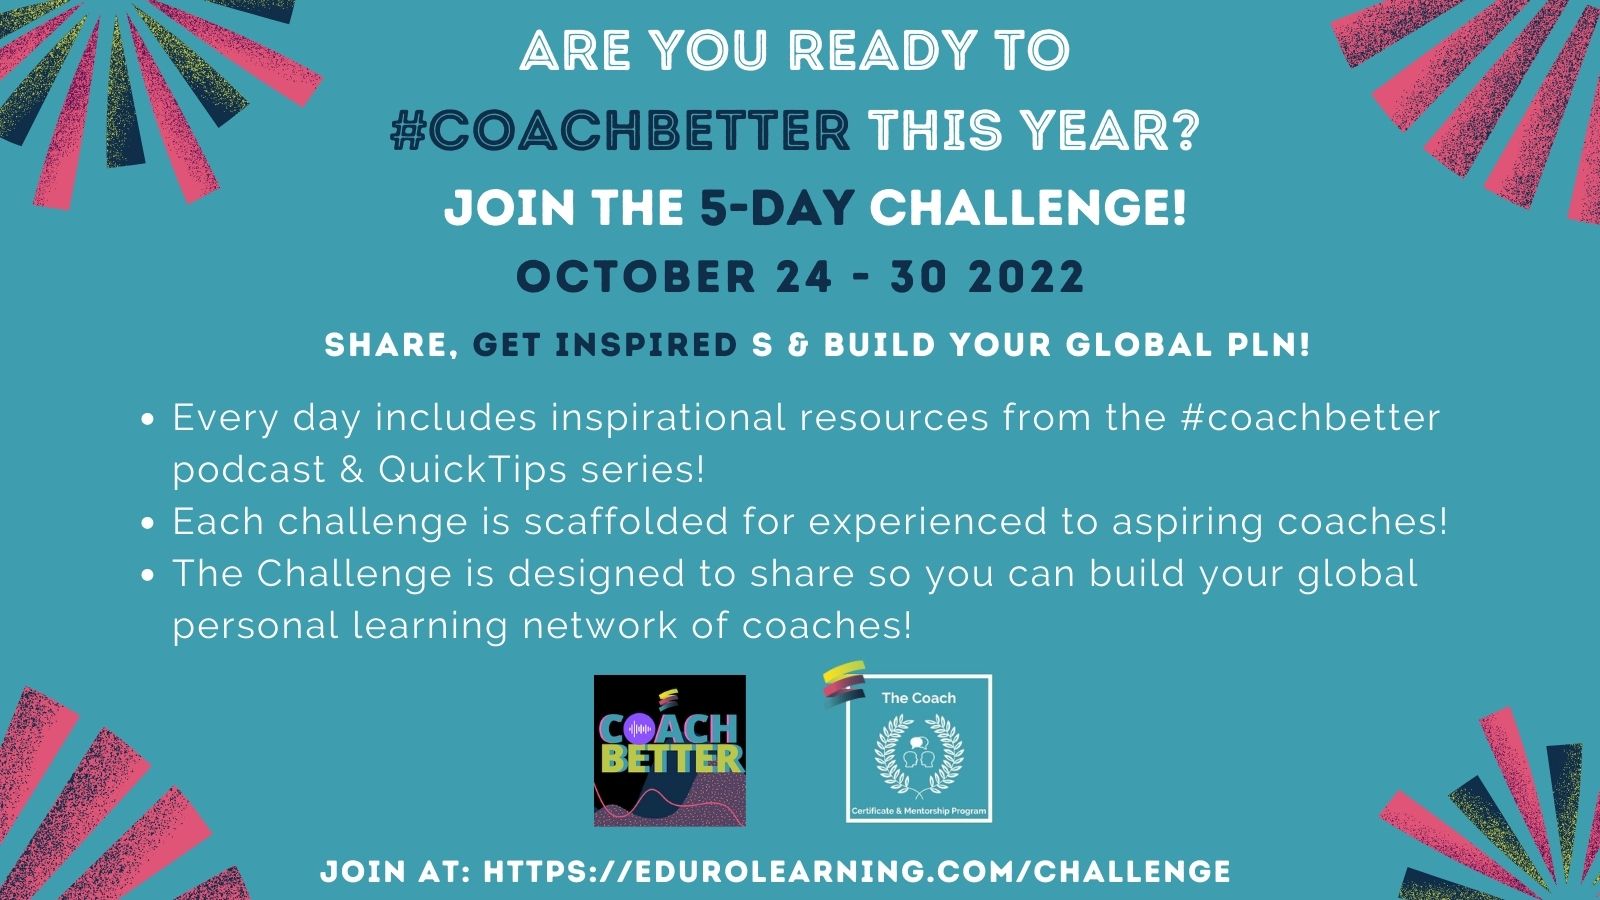 Join the #coachbetter challenge!